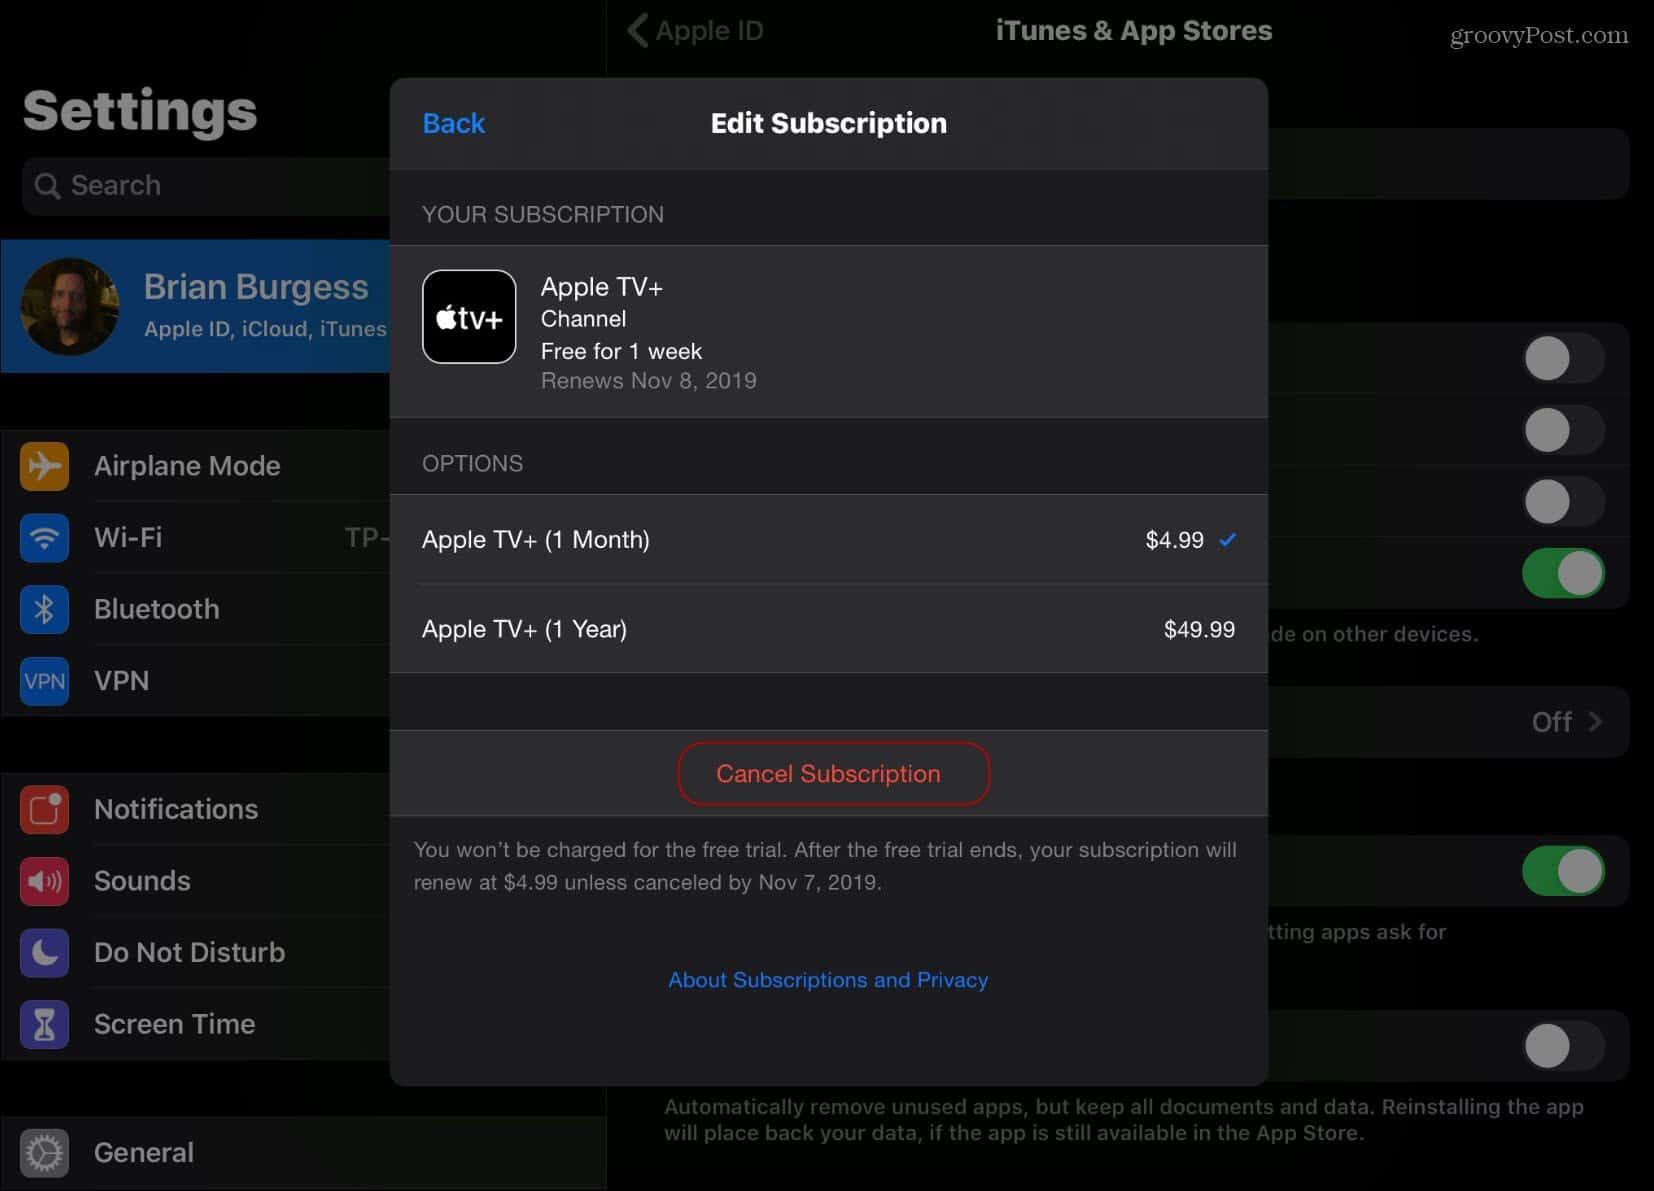 Tap on apple TV+ and then tap on Cancel Subscription and then tap Confirm. 